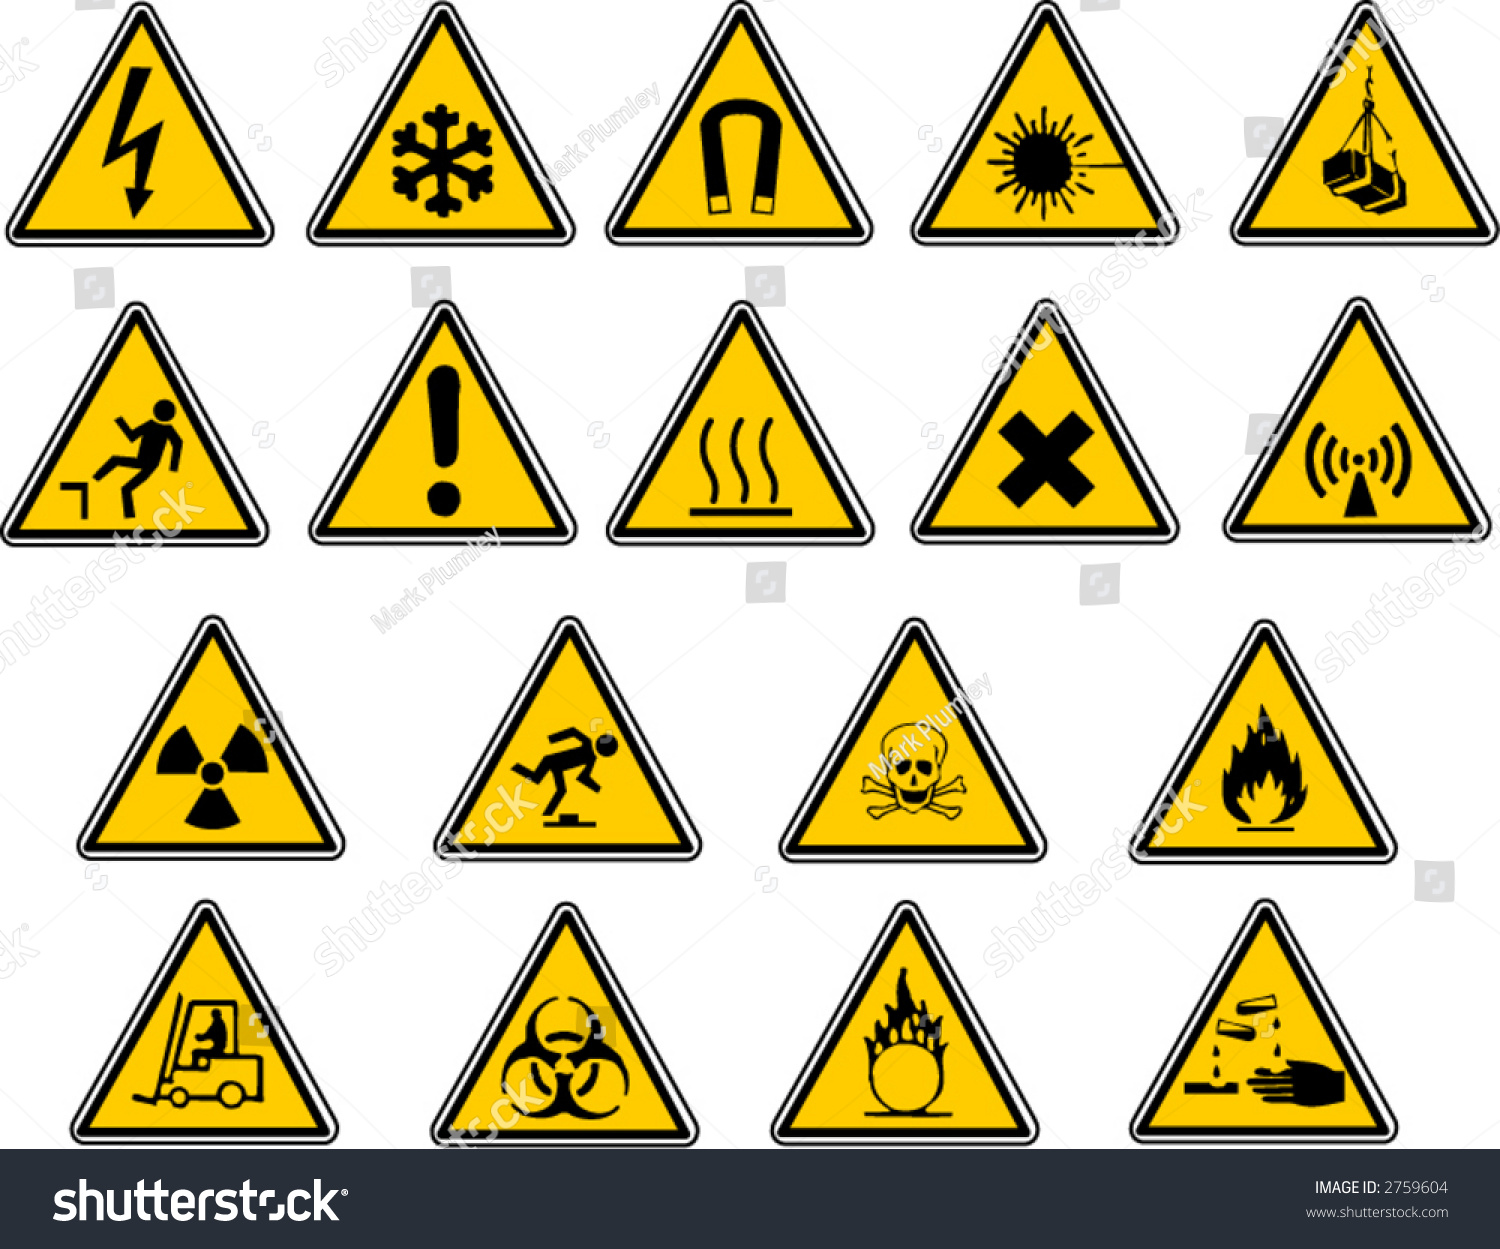 Safety Signs For Your Vector Work. - 2759604 : Shutterstock